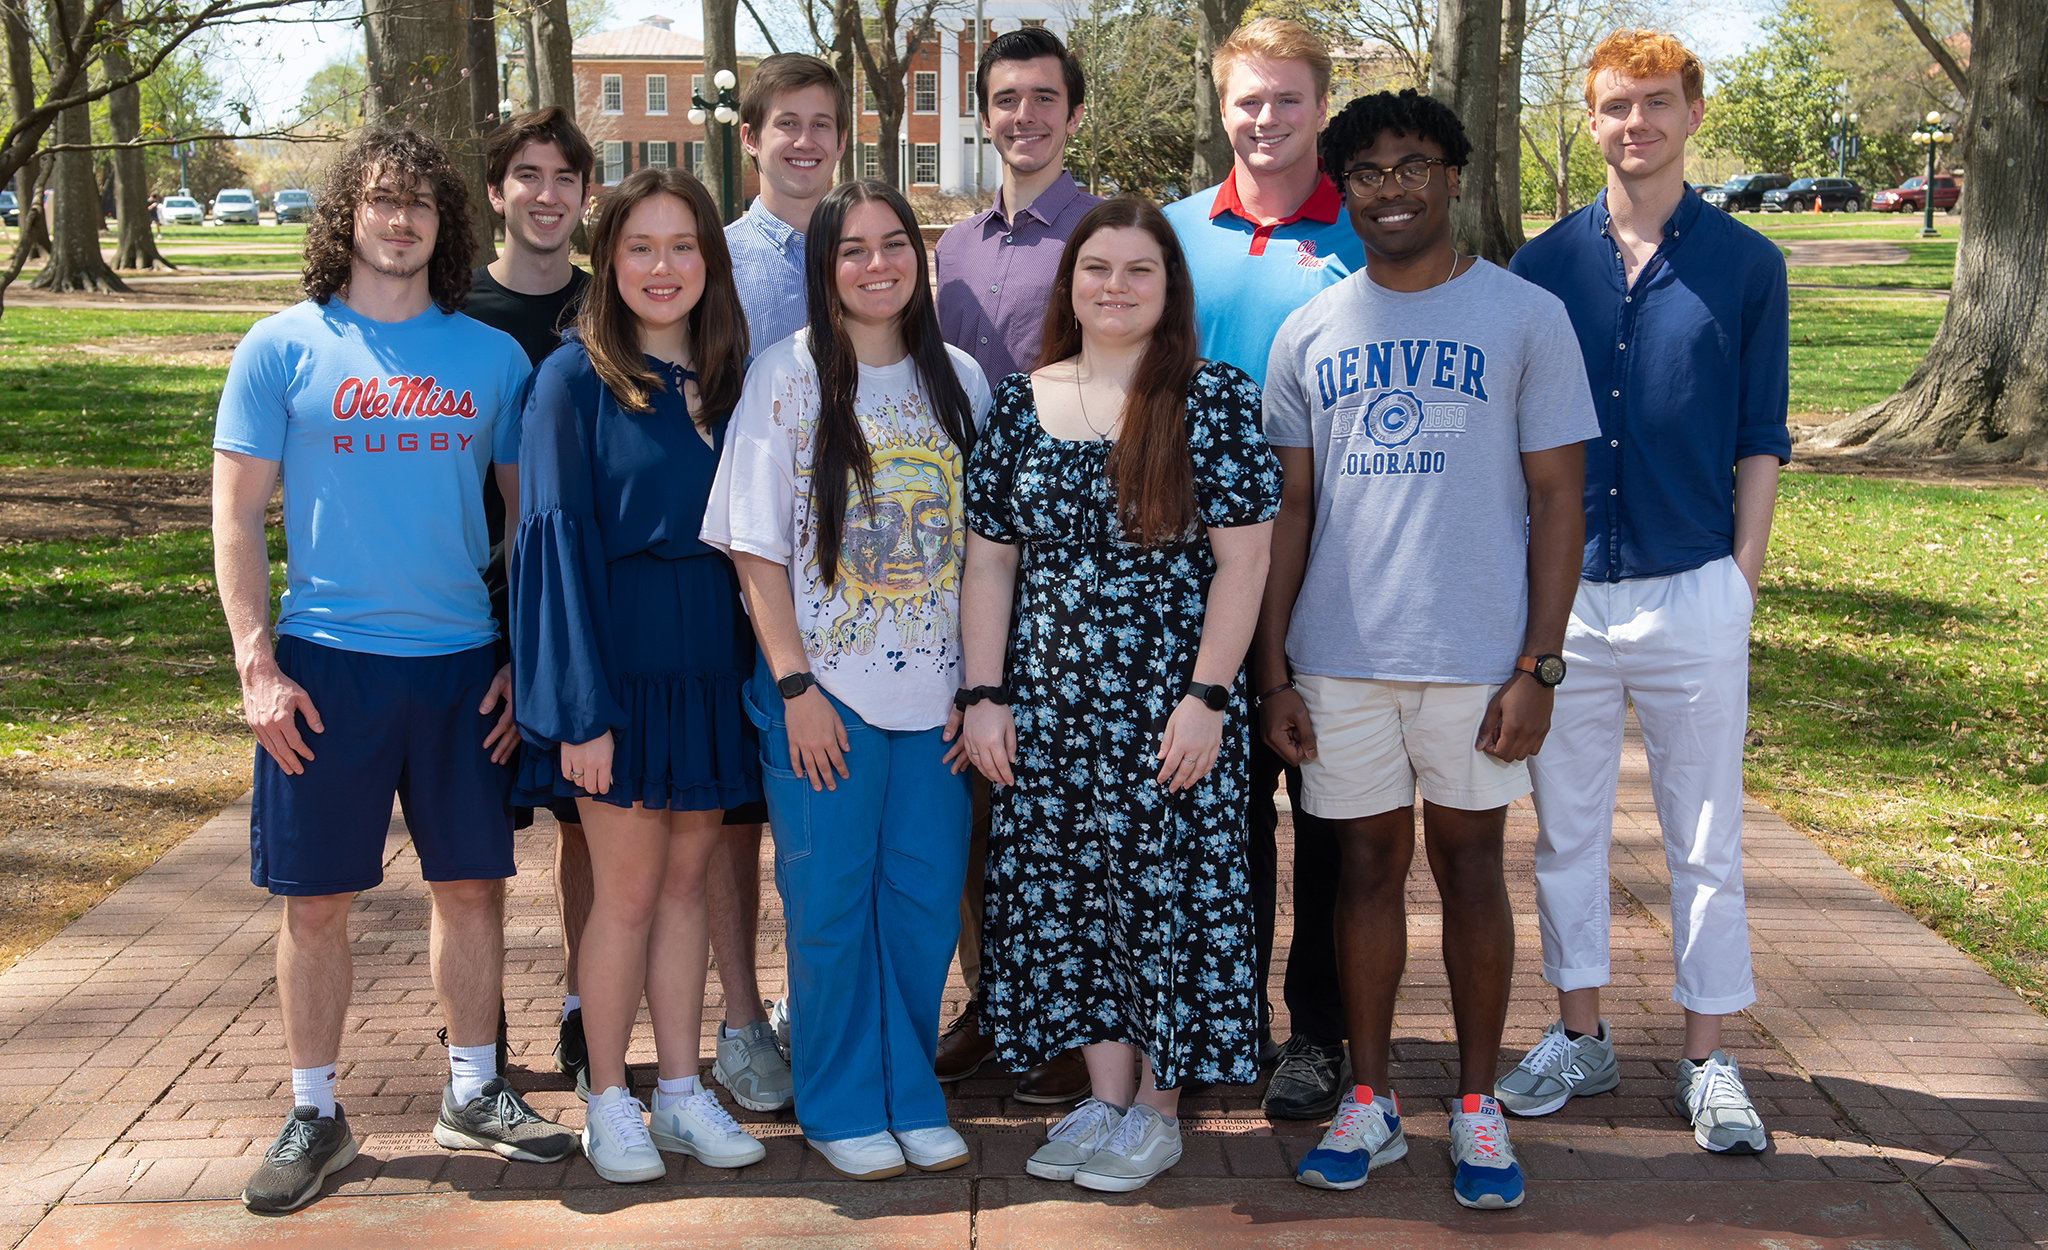 Students in the Chinese Language Flagship program going to Taiwan this fall for their capstone program year include (front, from left) Luke Jacobus, Susan Soh, Brigitte Reed, Sarah Hall and Bradley Brantley, and (back, from left) Daniel Ferro, Garrett Dunne, Christopher Buchan, James Christian and Cameron Bryan. Photo by Kevin Bain/Ole Miss Digital Imaging Services